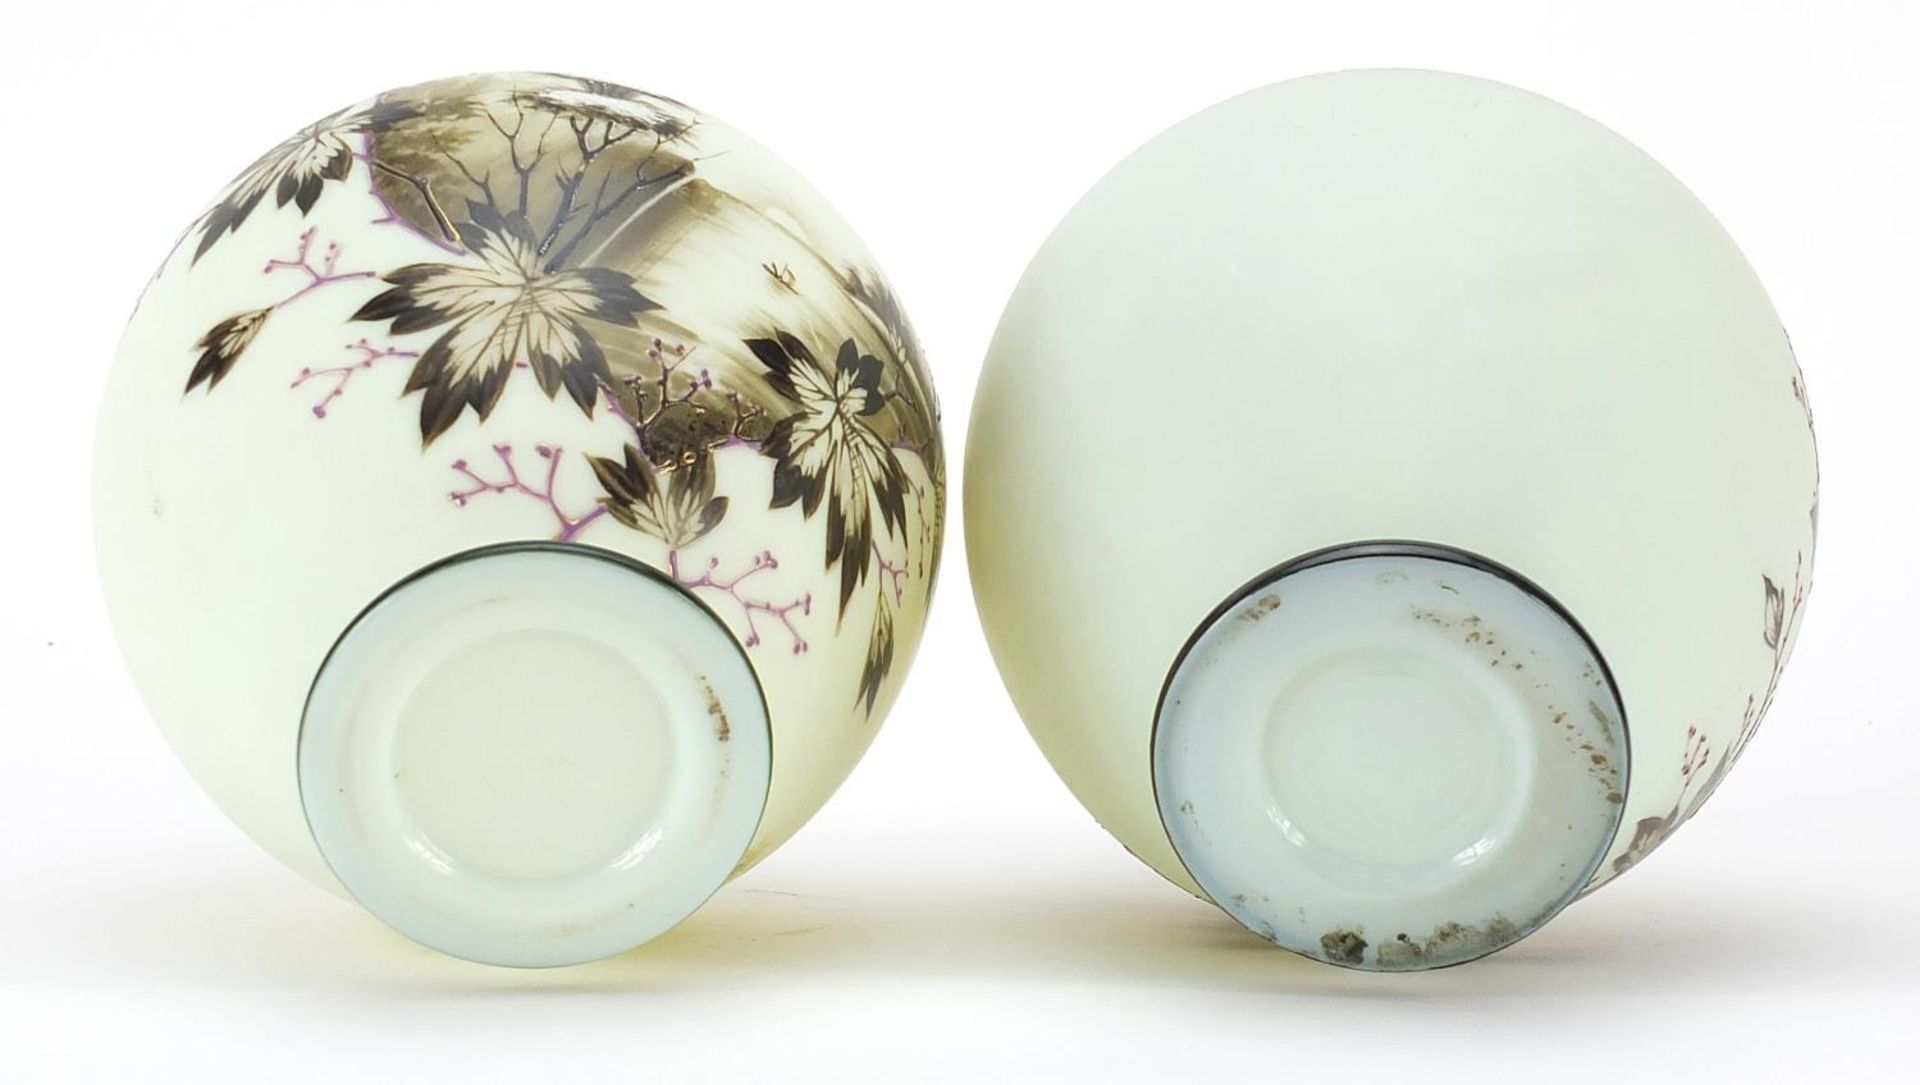 Pair of 19th century opaline glass vases hand painted with trees beside water within floral borders, - Image 3 of 3